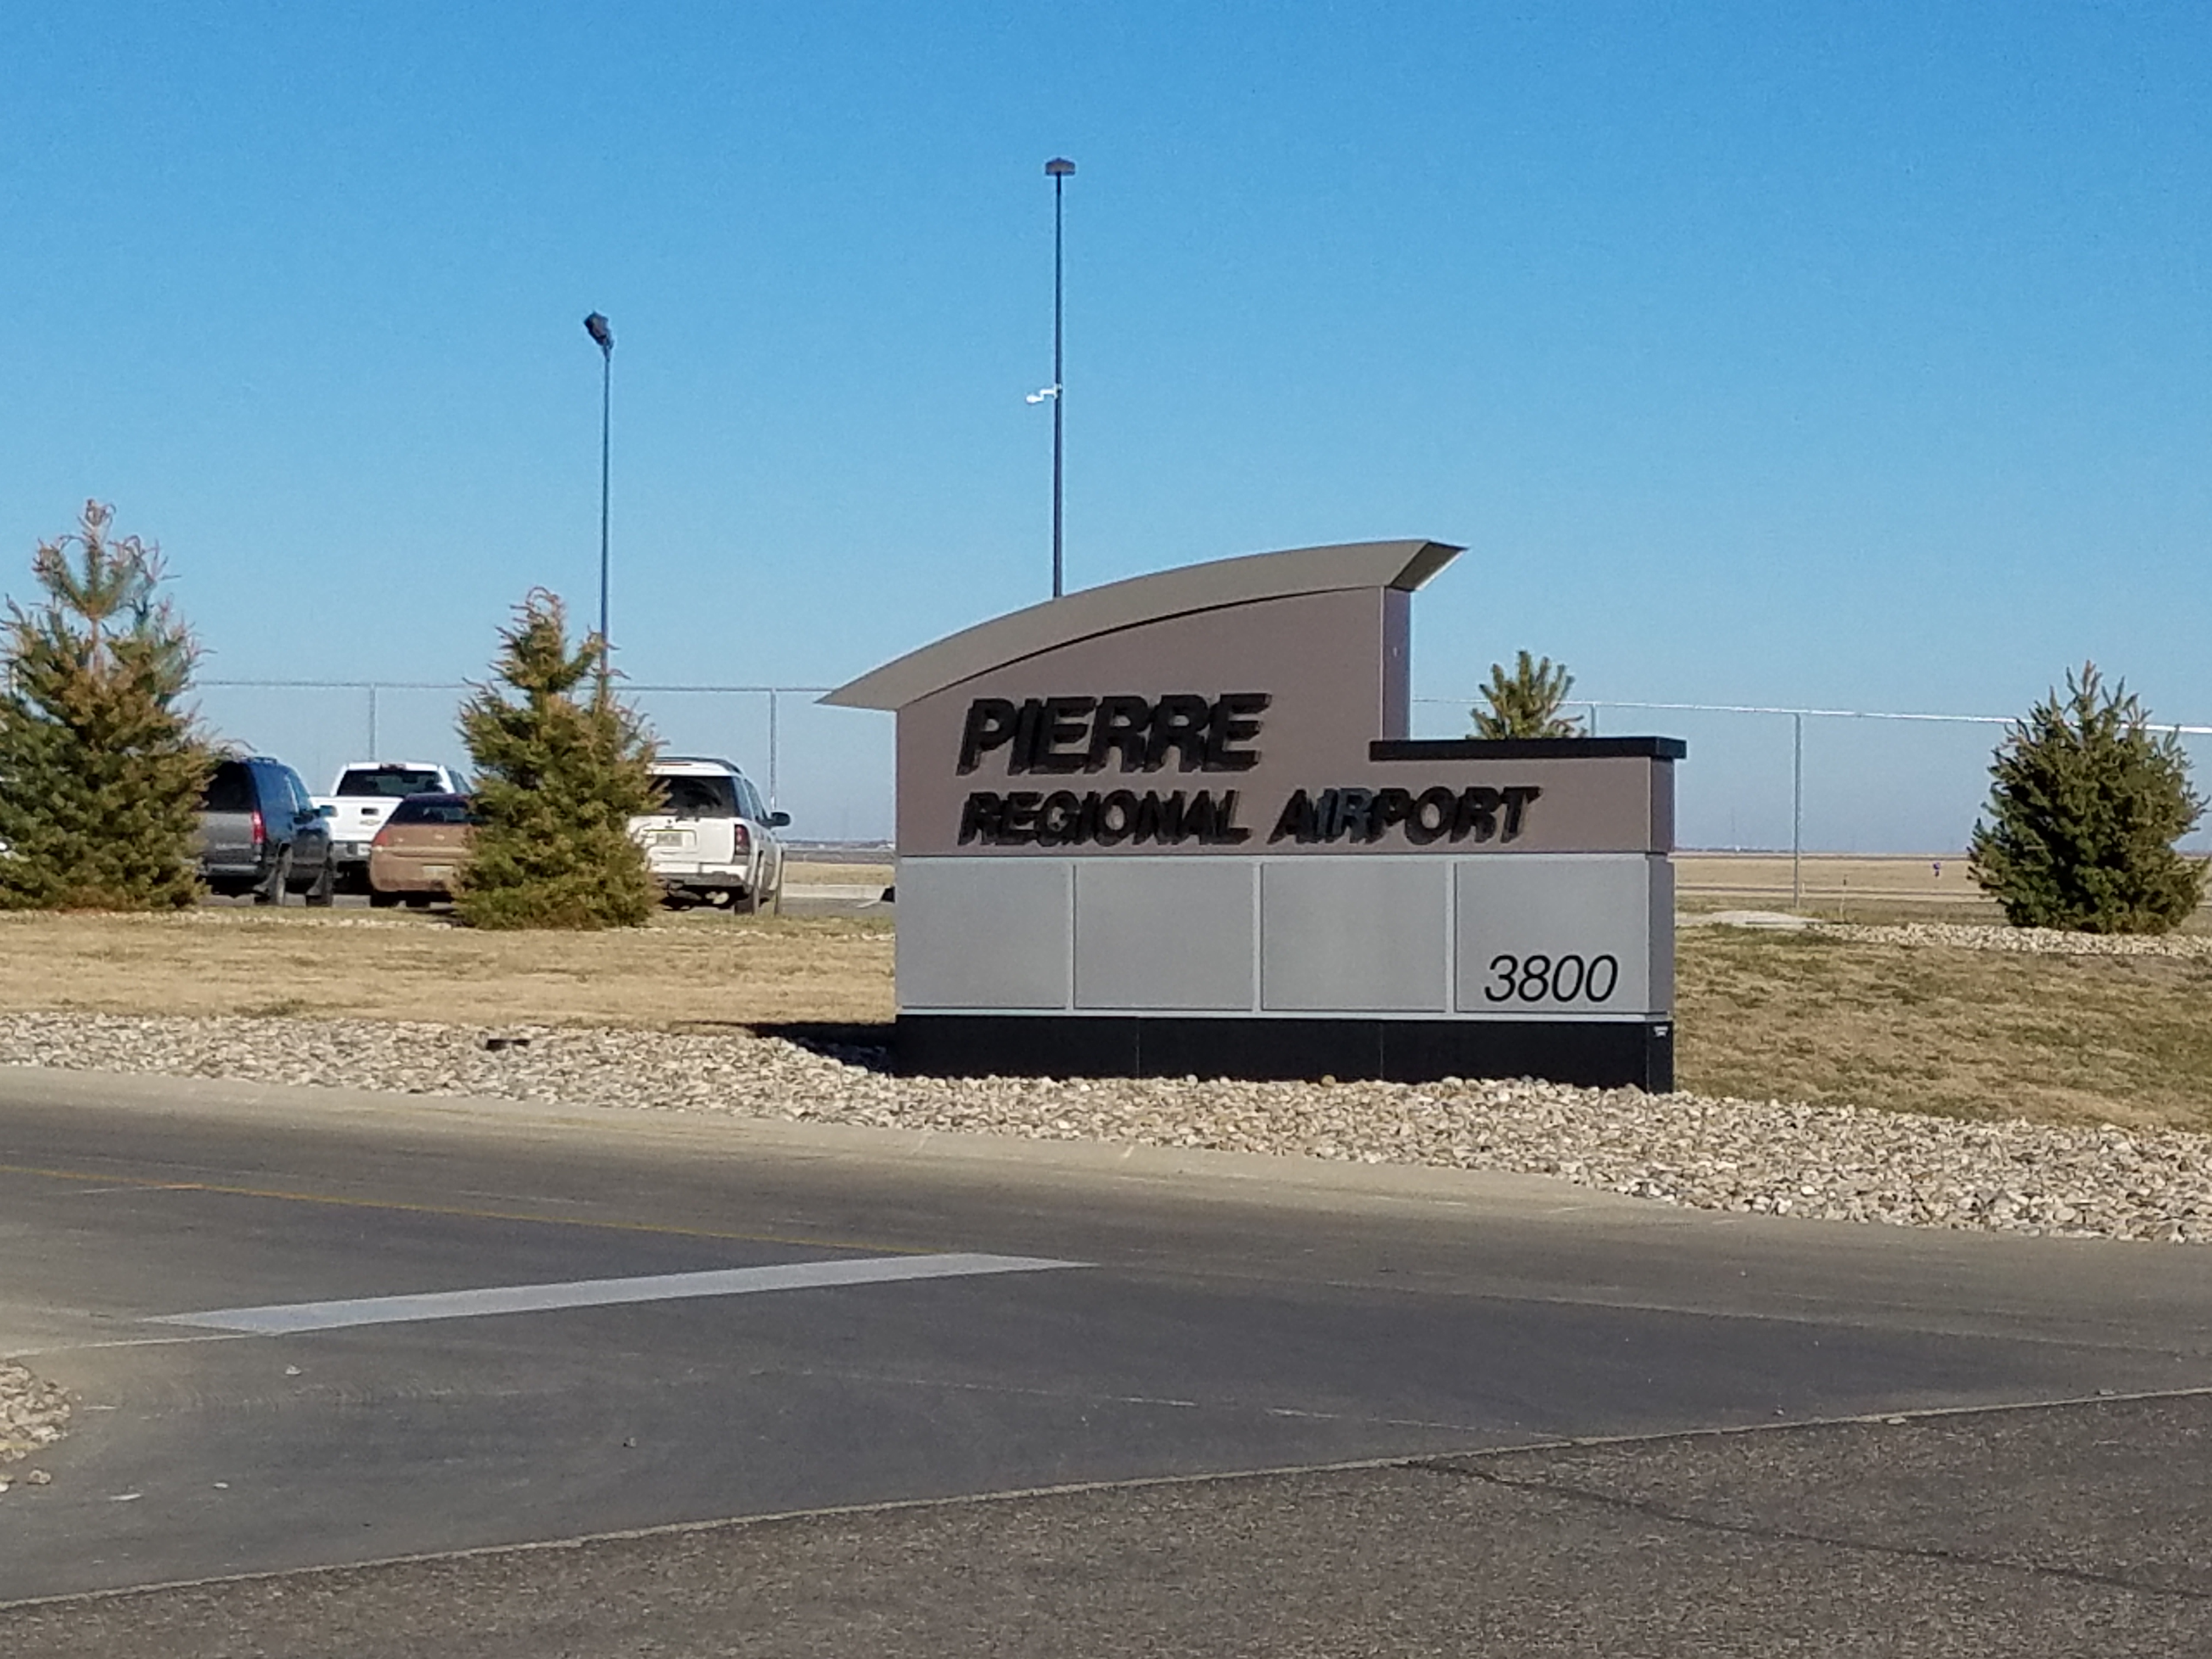 Pierre Regional Airport Runway Project Cancelled For 2022